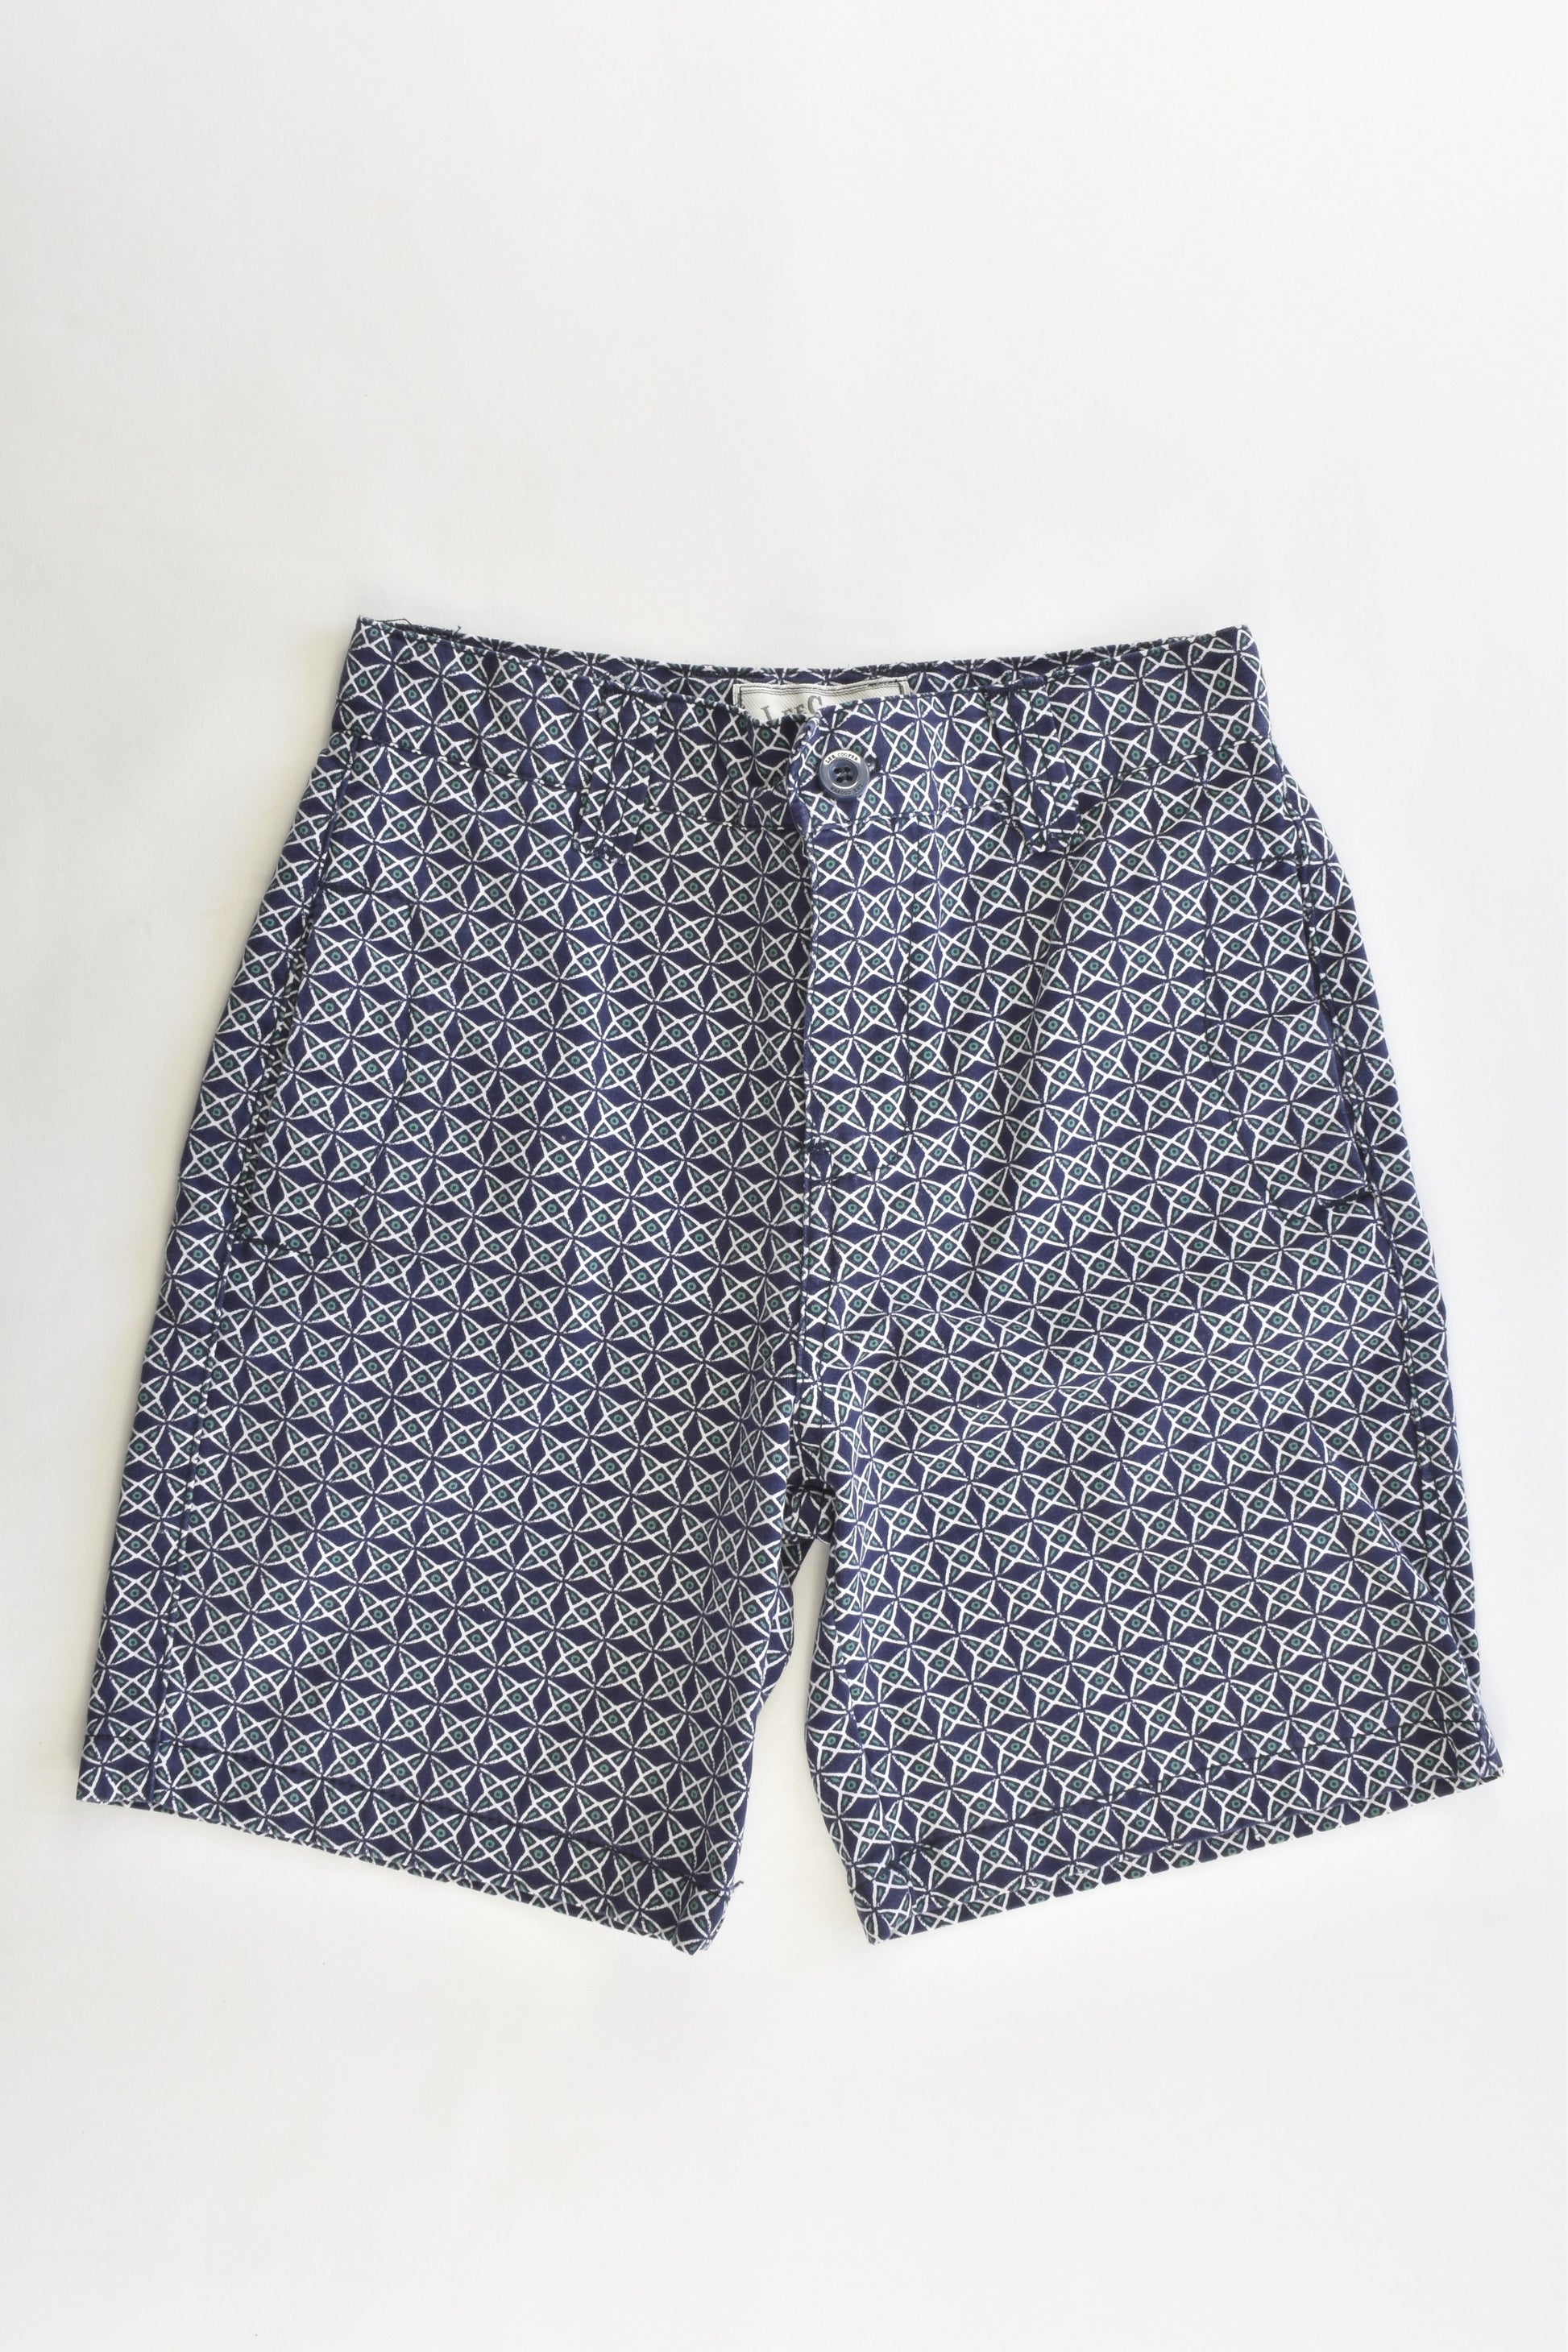 NEW Lee Cooper Size 7 Shorts